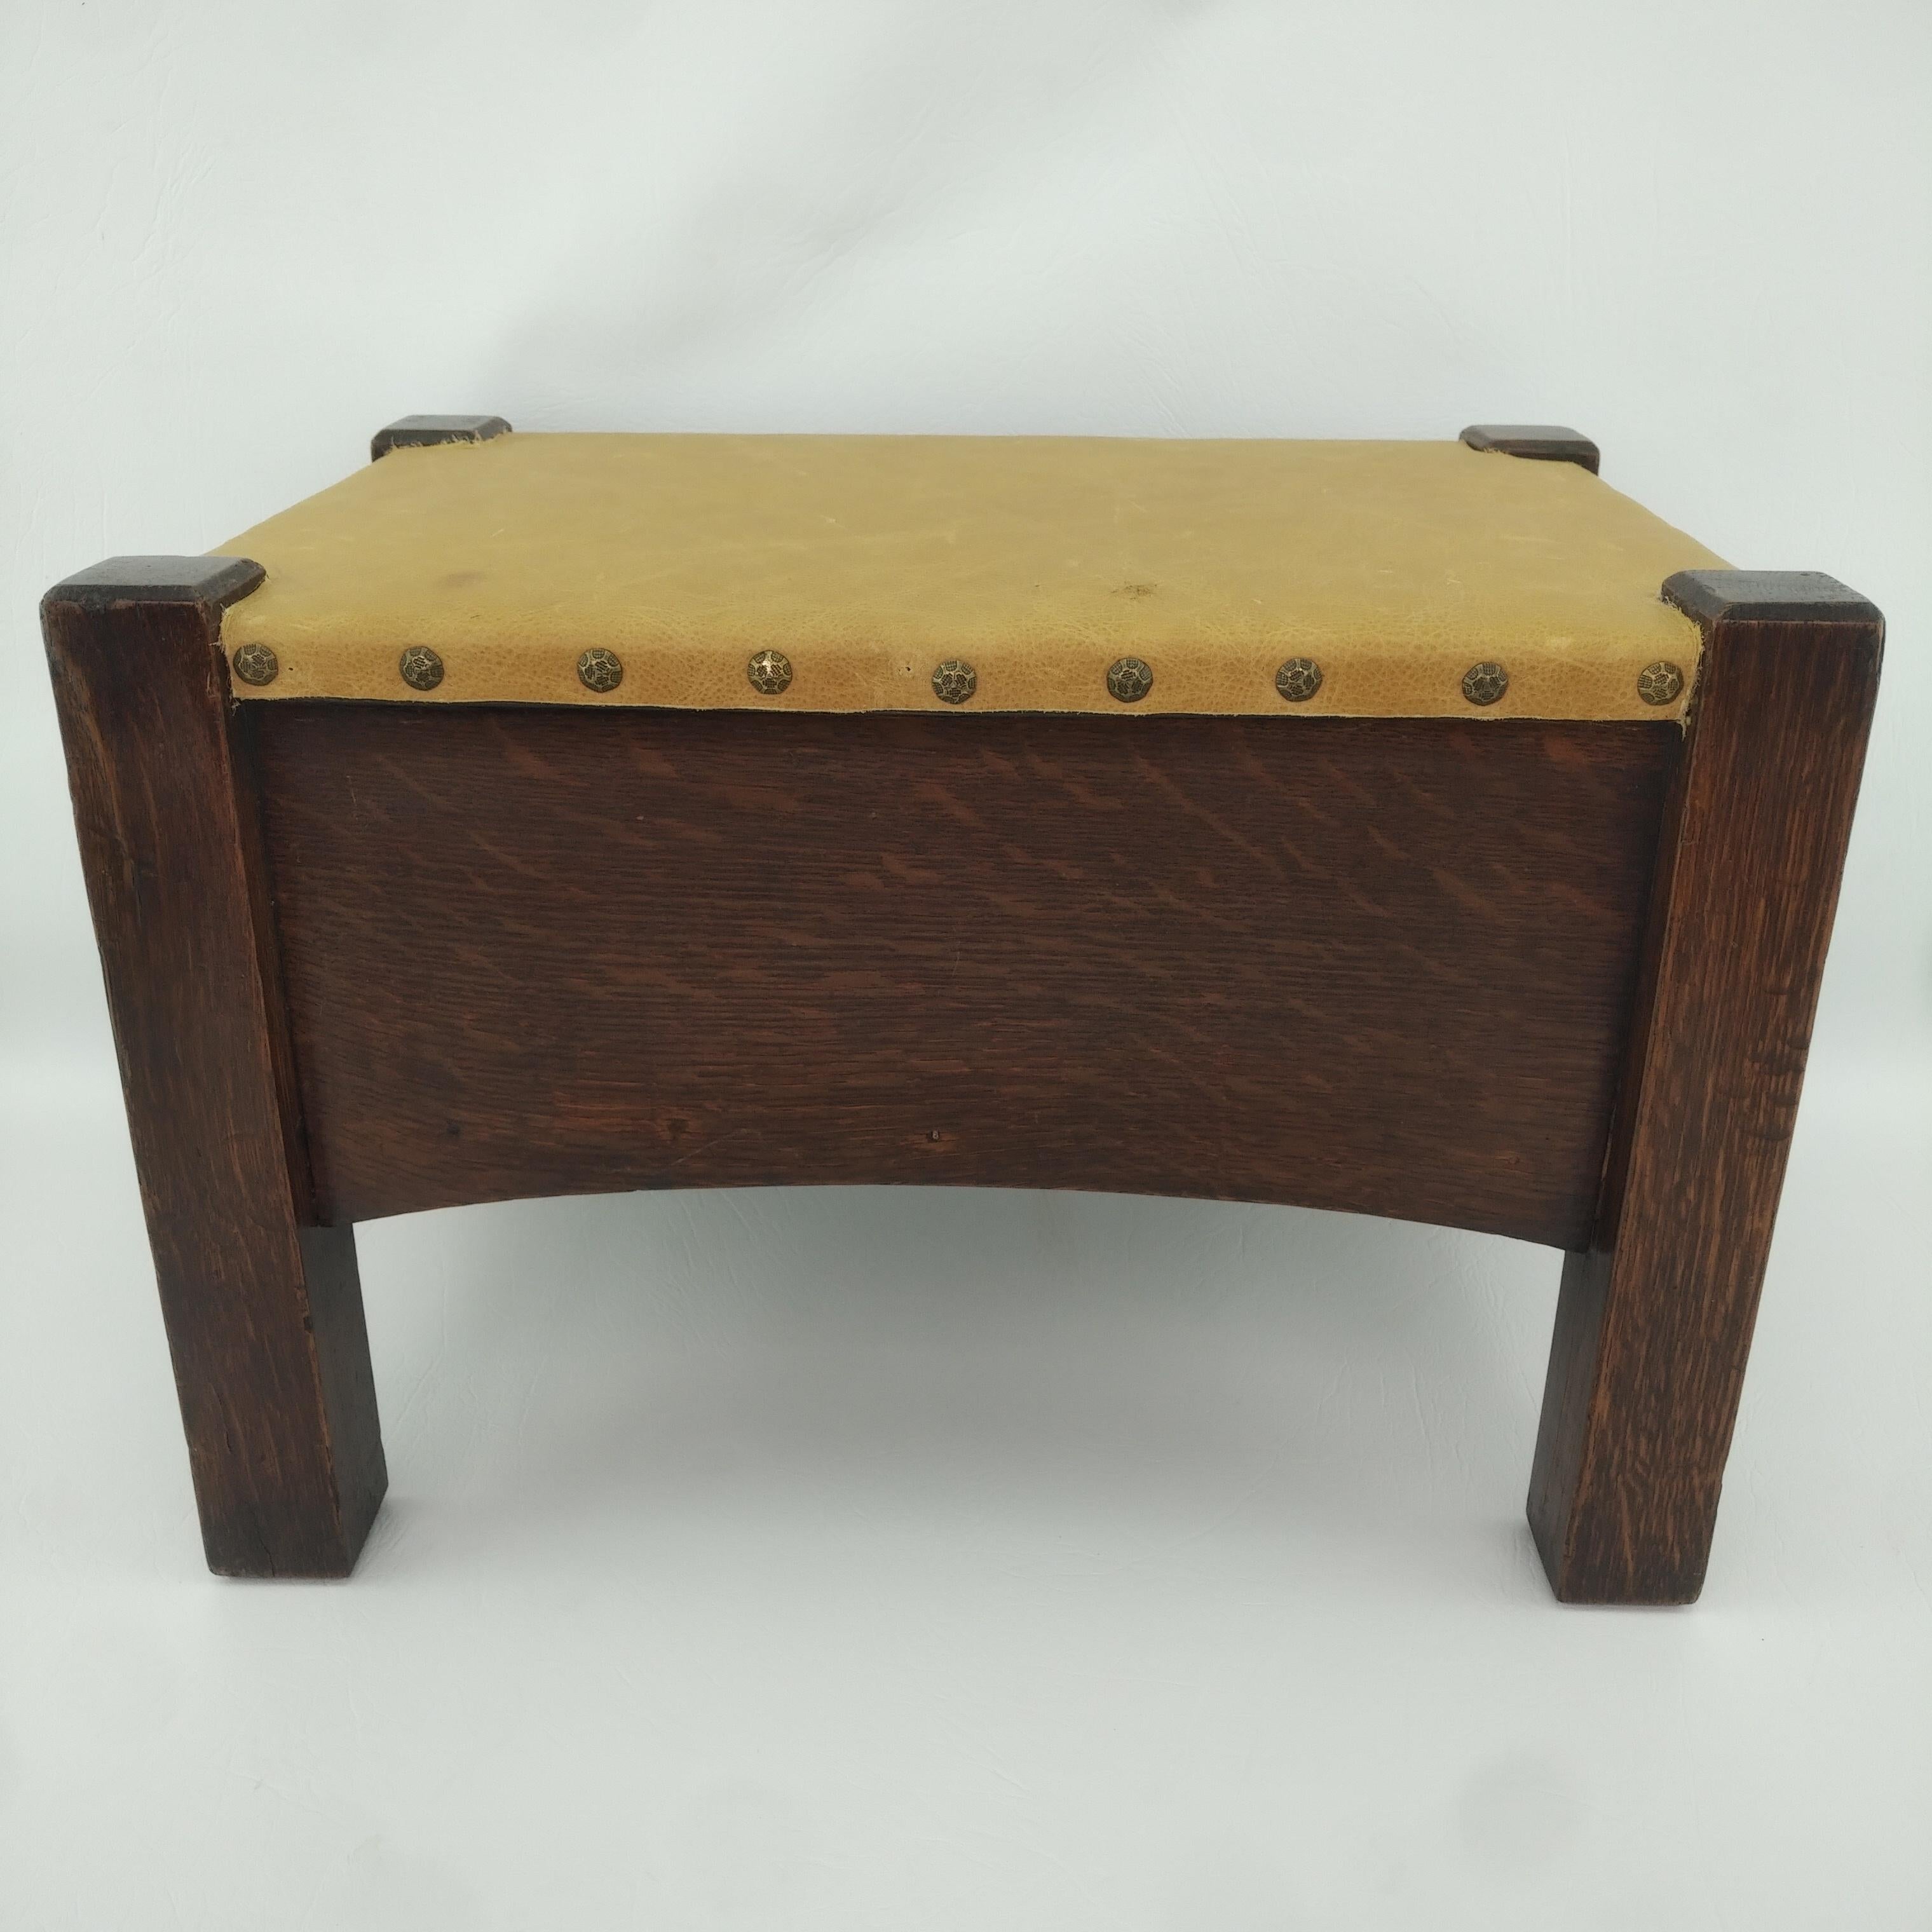 Charles Limbert One Drawer Footstool c1910 In Fair Condition For Sale In Hamilton, Ontario